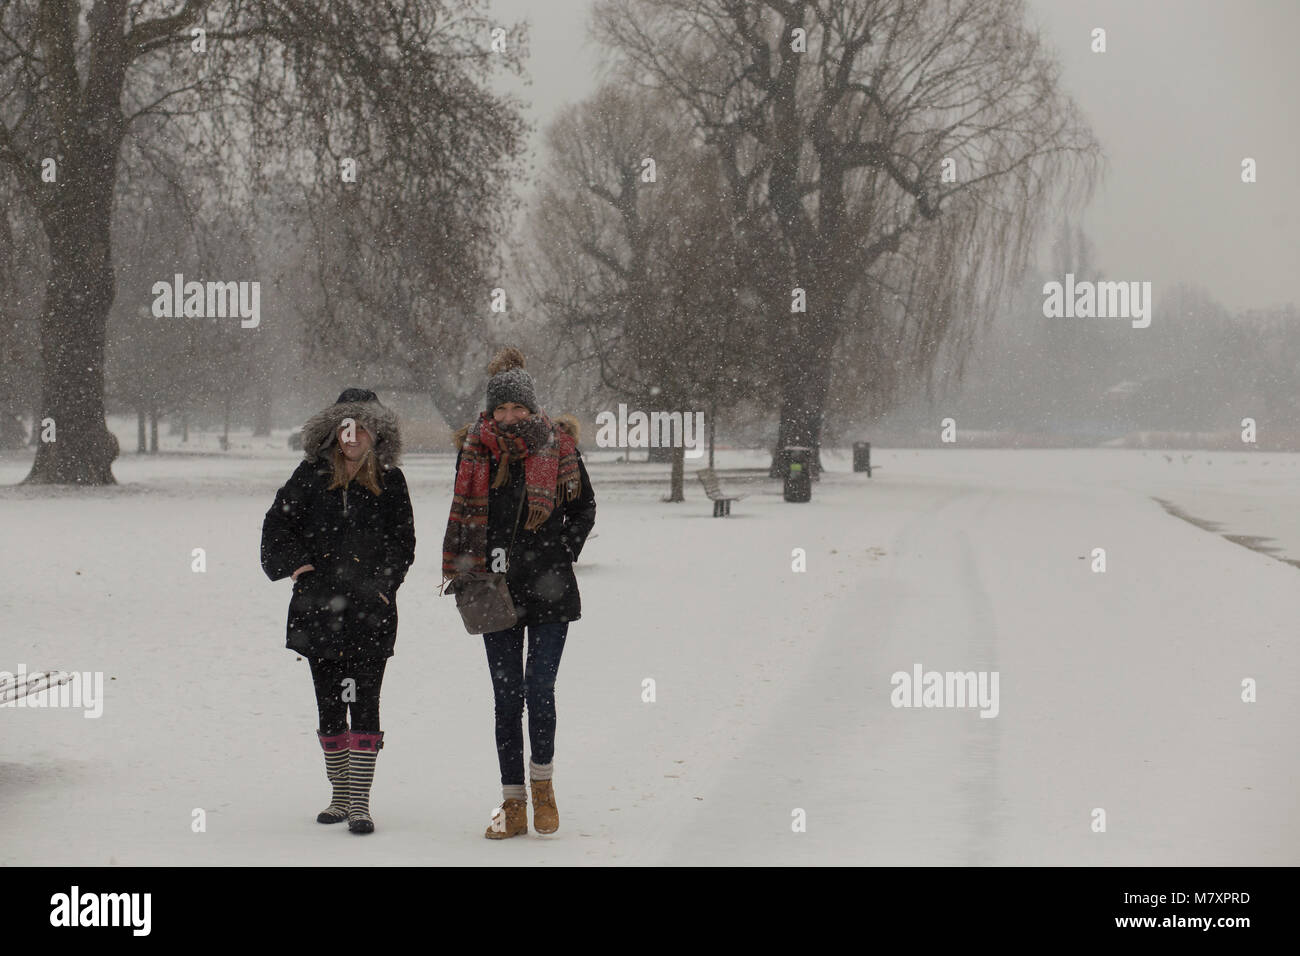 LONDON, UK: Two young women walking in white Regent's Park while it is snowing Stock Photo